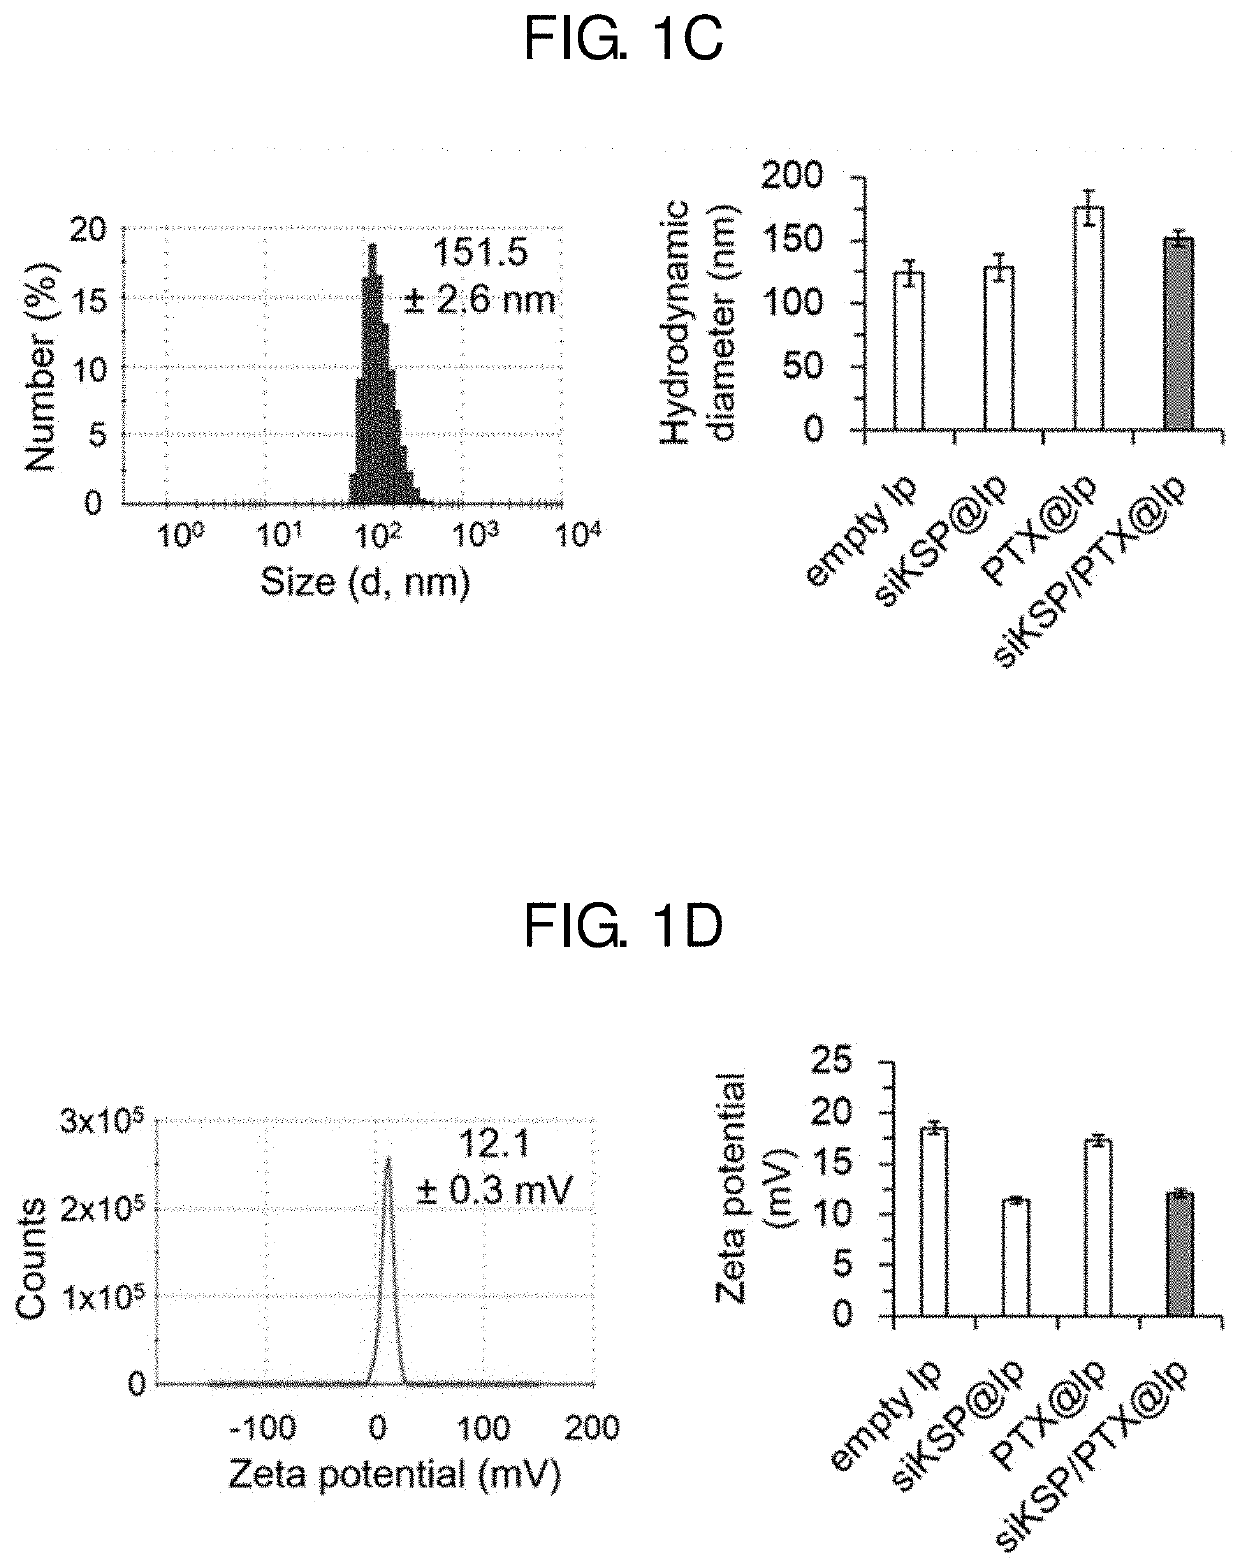 Pharmaceutical composition for preventing or treating cancer comprising ksp inhibitor and mitosis inhibitor